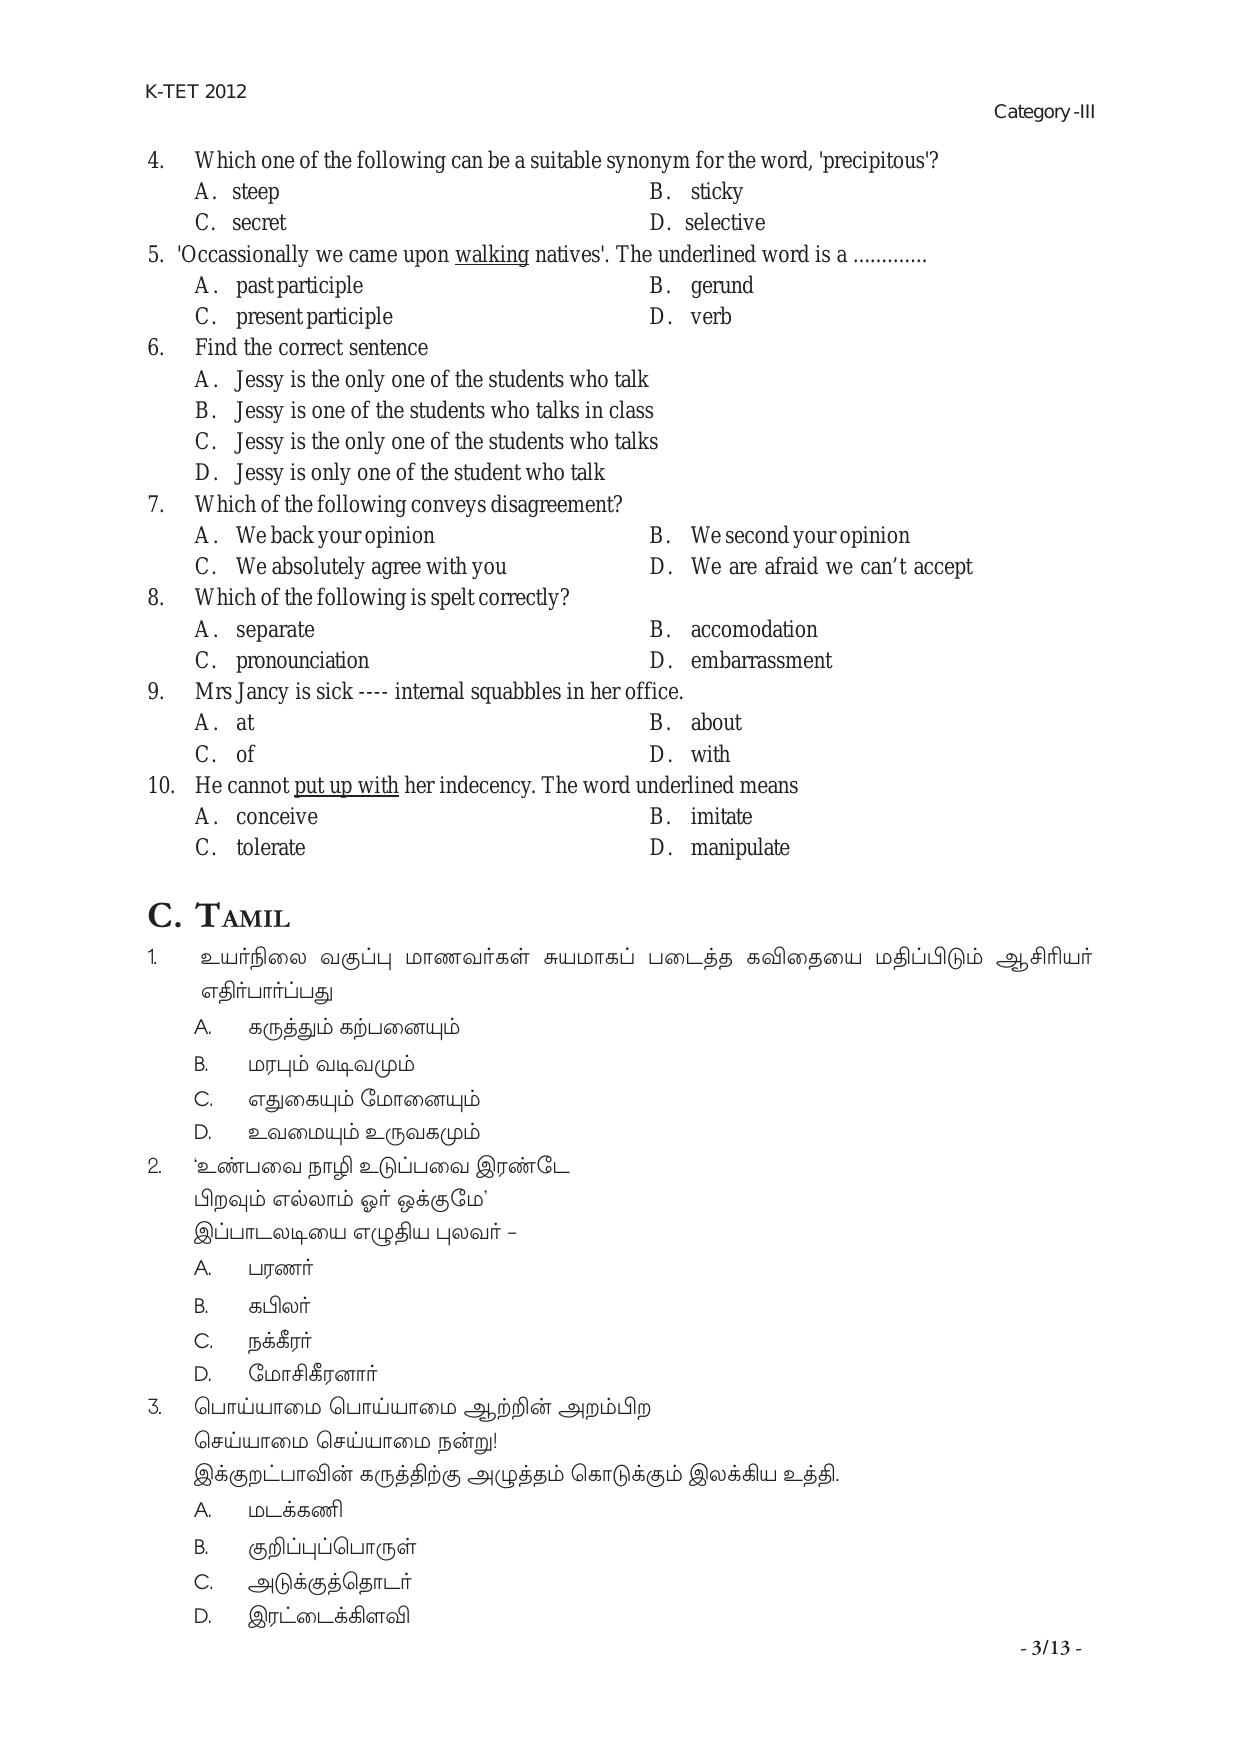 KTET Category III High School Teacher (8 to 10) Exam Previous Papers - Page 13